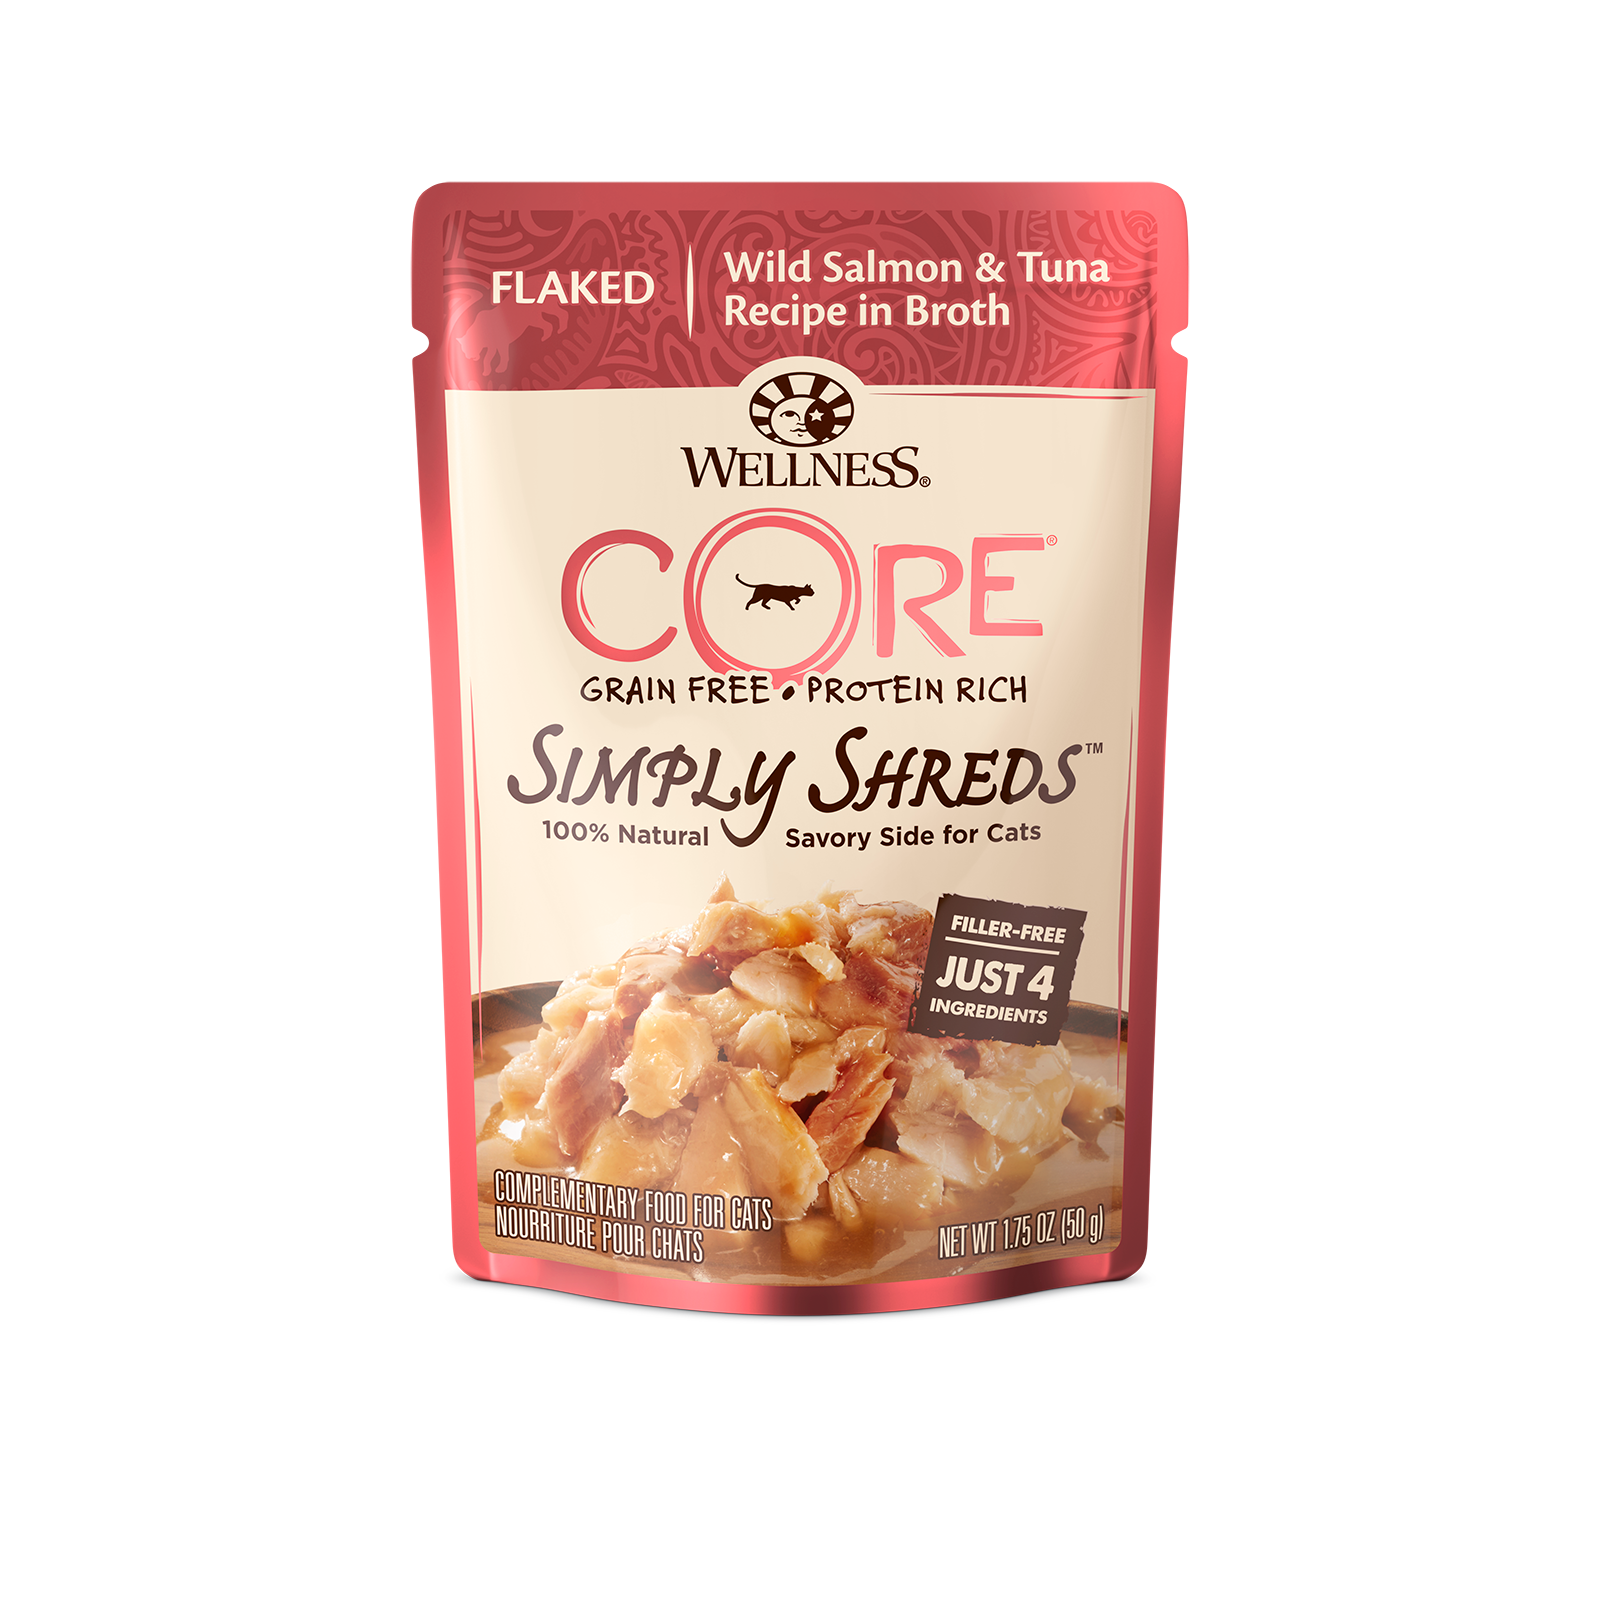 Wellness CORE Simply Shreds Cat Food Pouch Adult Flaked Wild Salmon & Tuna in Broth